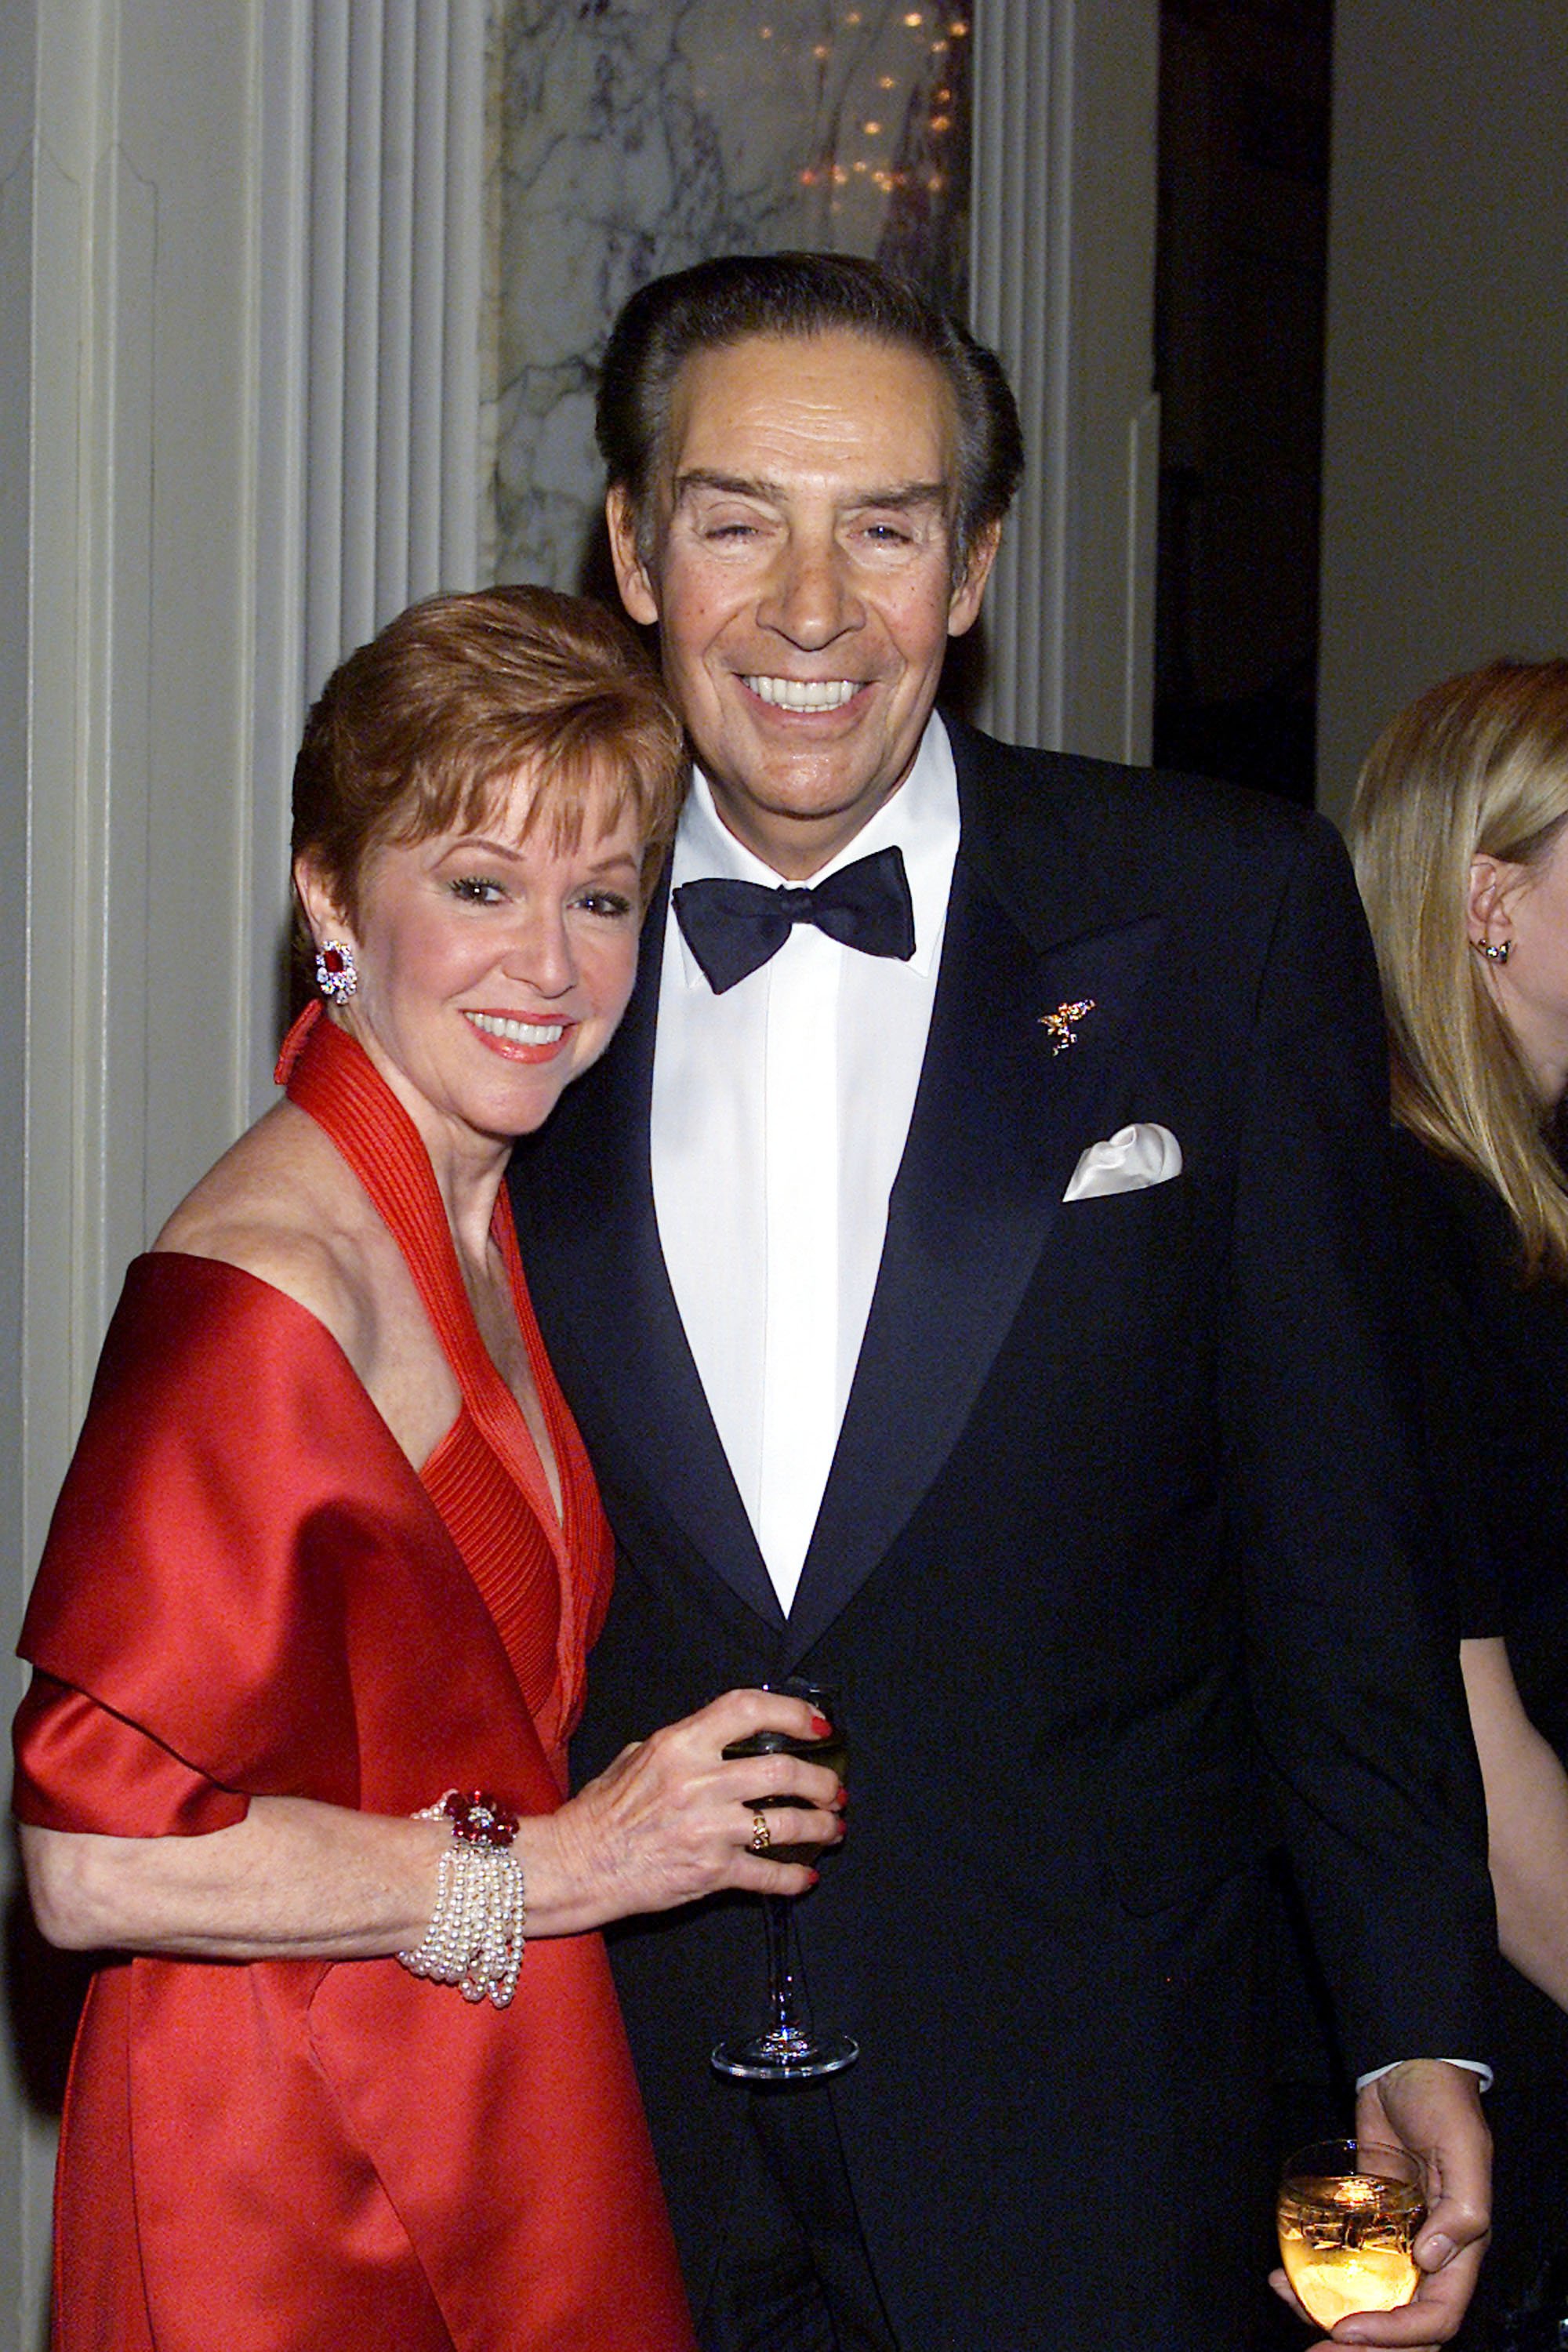 Elaine Orbach and Jerry Orbach at The American Theatre Wing Gala on April 15, 2002 | Source: Getty Images